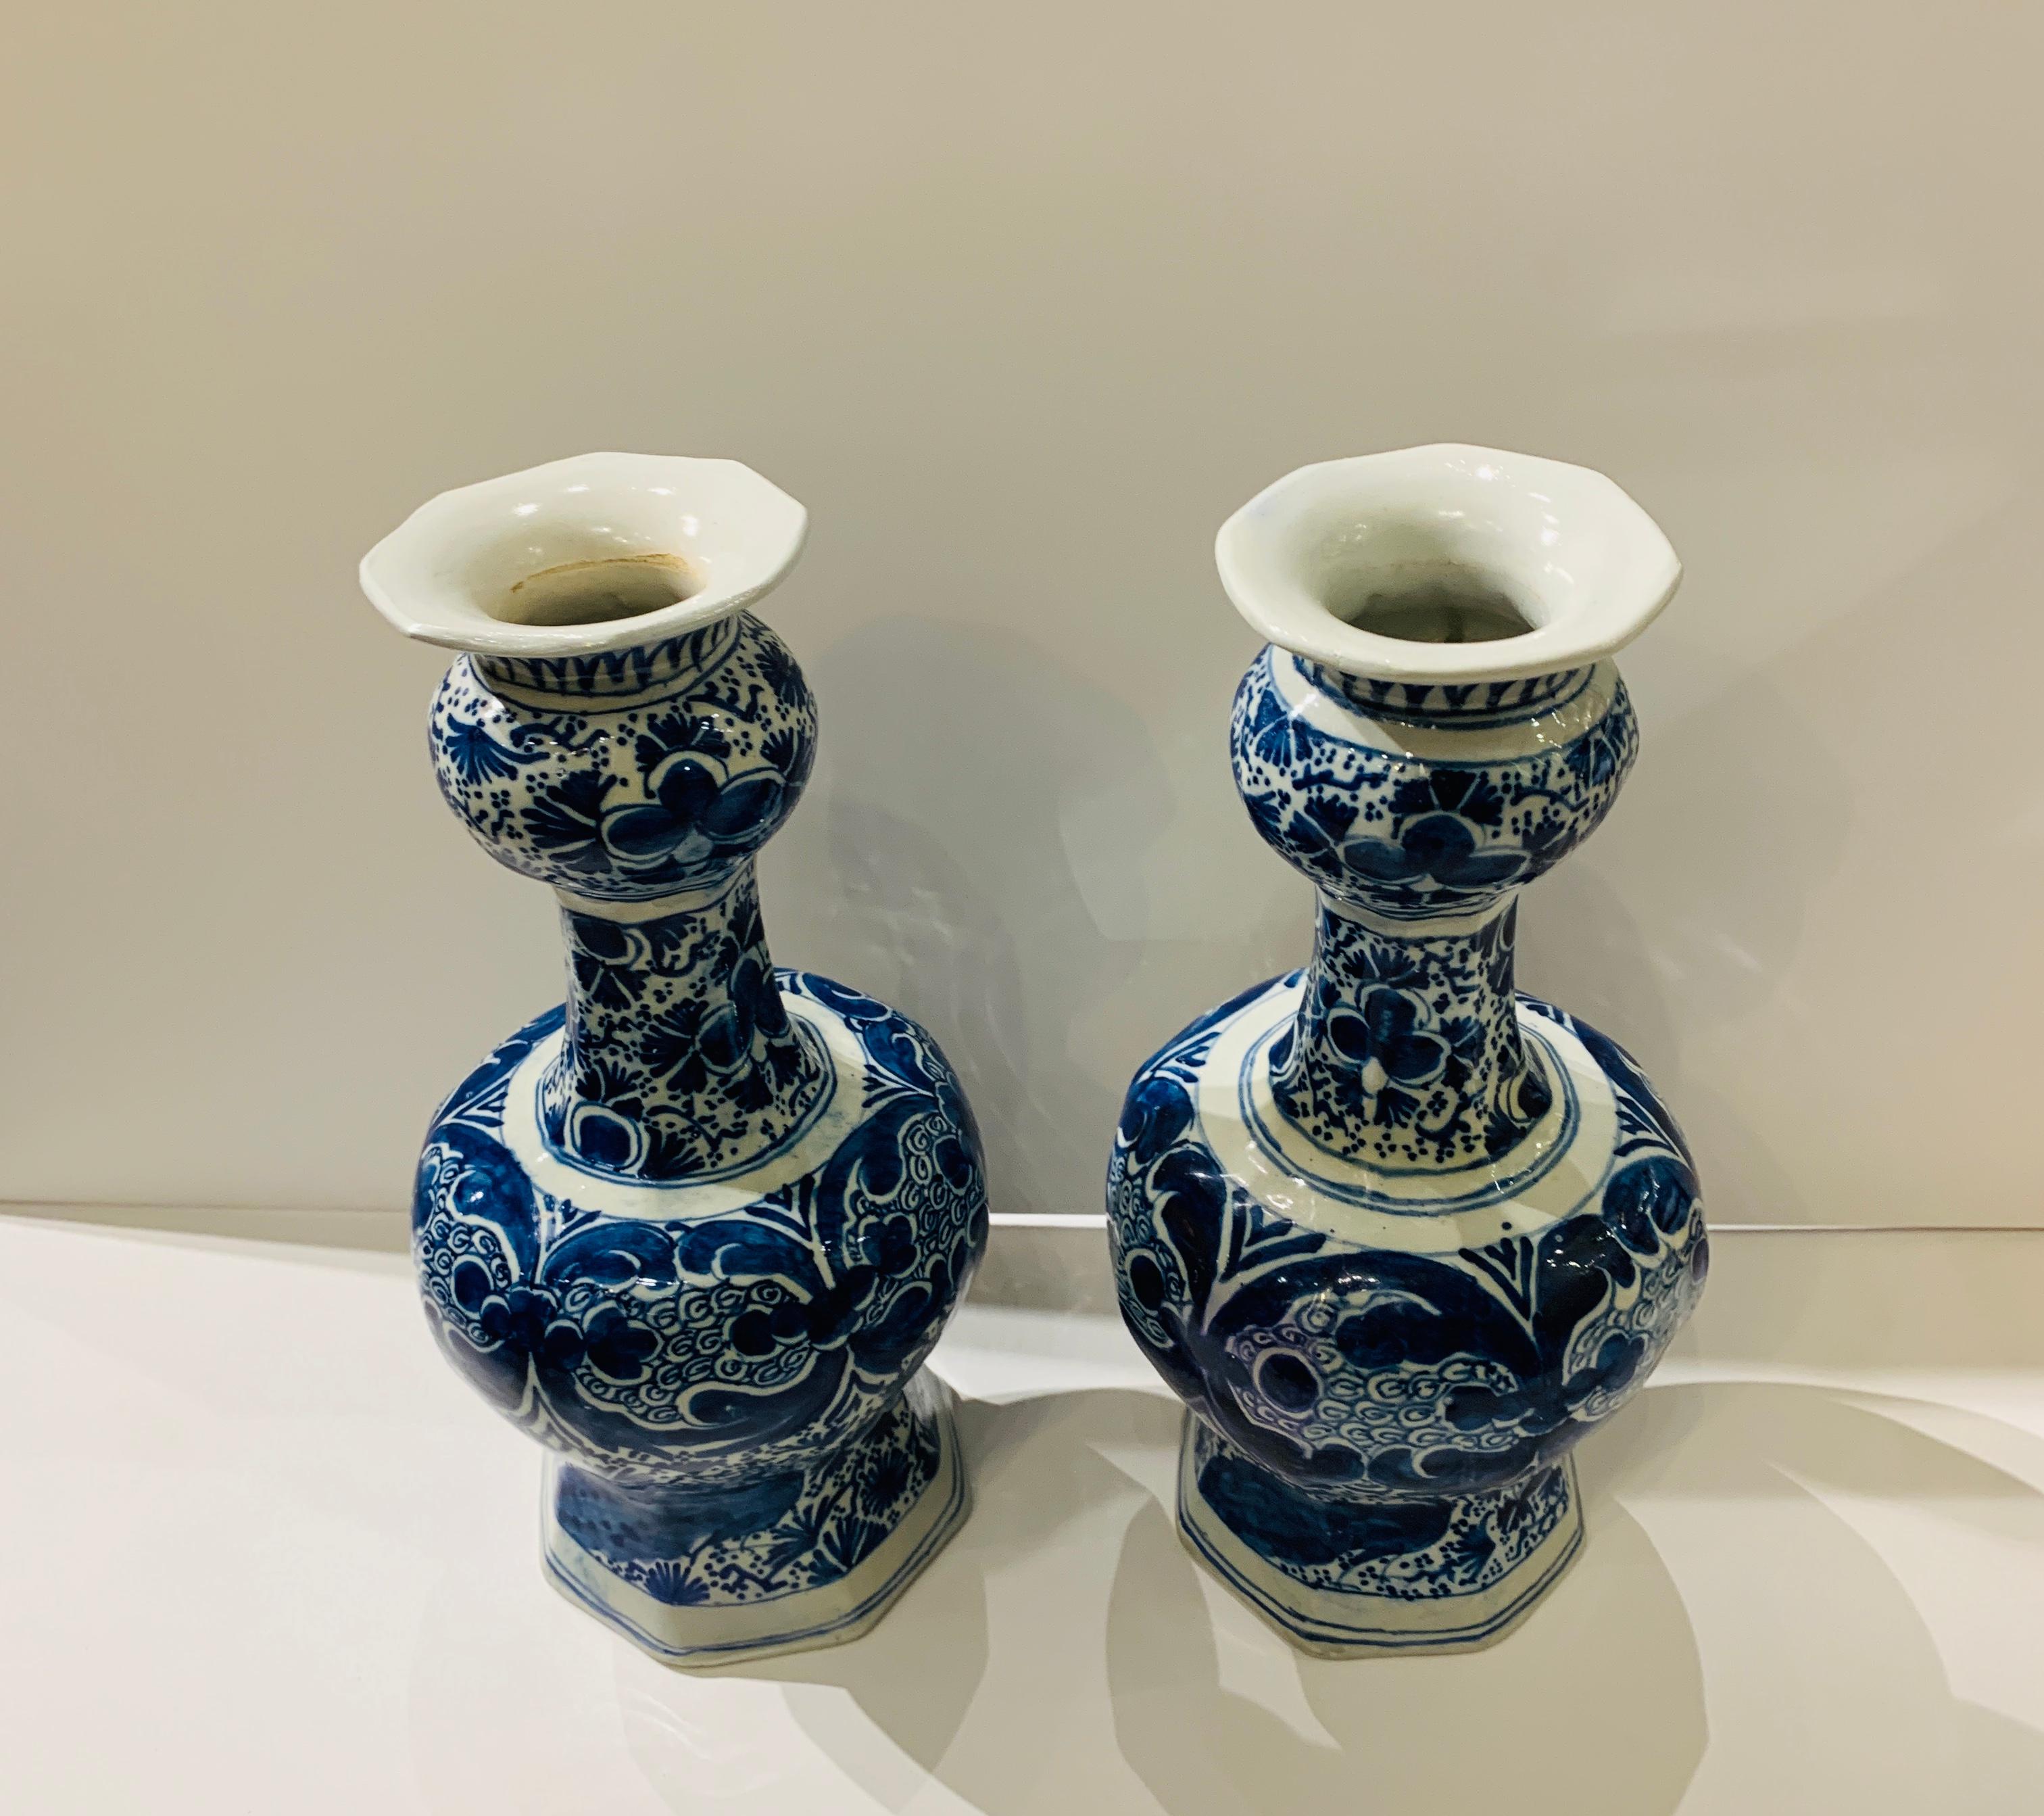 A Pair of Dutch Delft Blue and White Vases made in the 18th century circa 1780. 
The vases measure 11.25